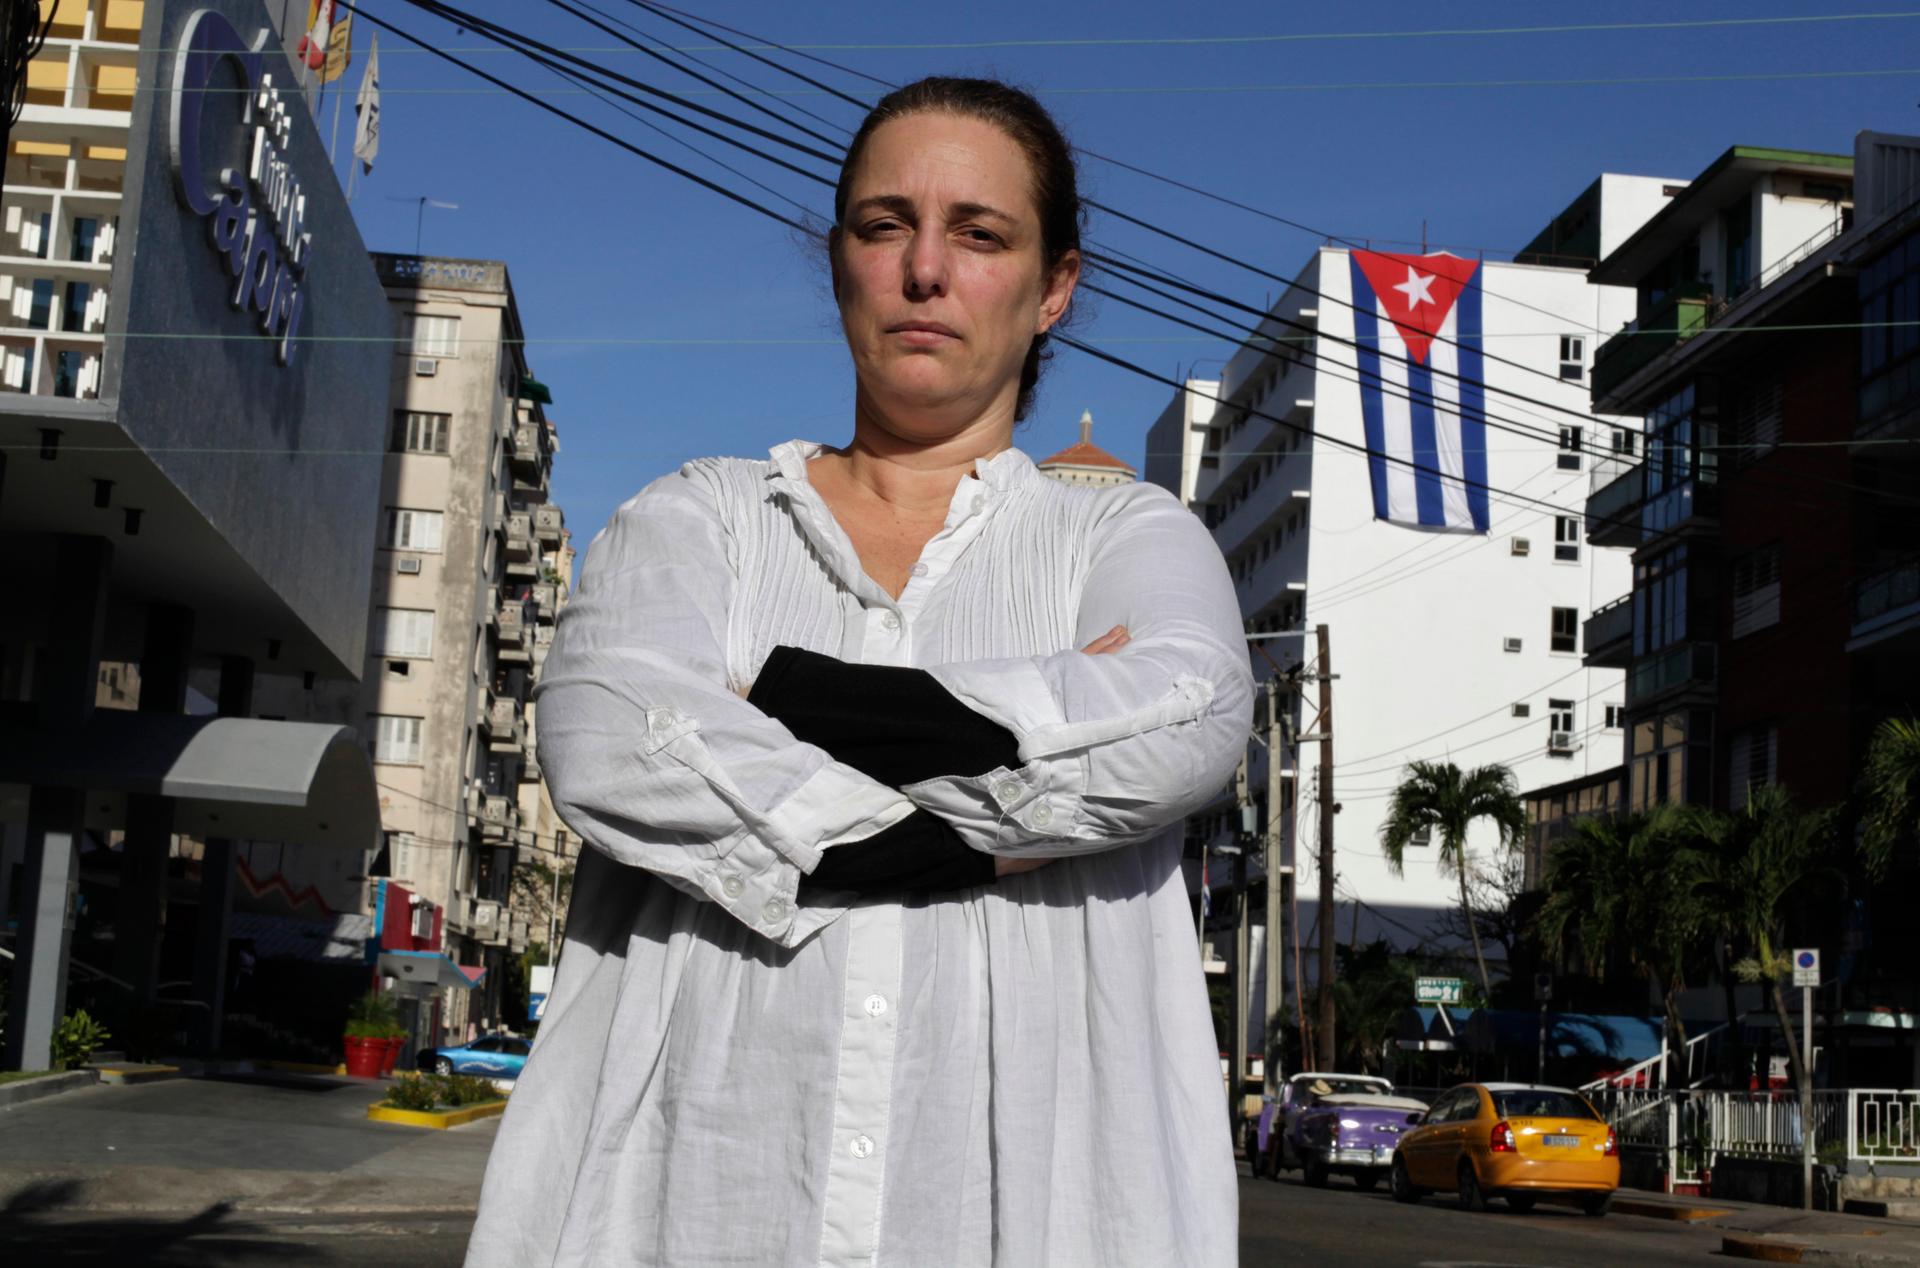 Cuban artist Tania Bruguera has been arrested by authorities in Havana three times in recent years.